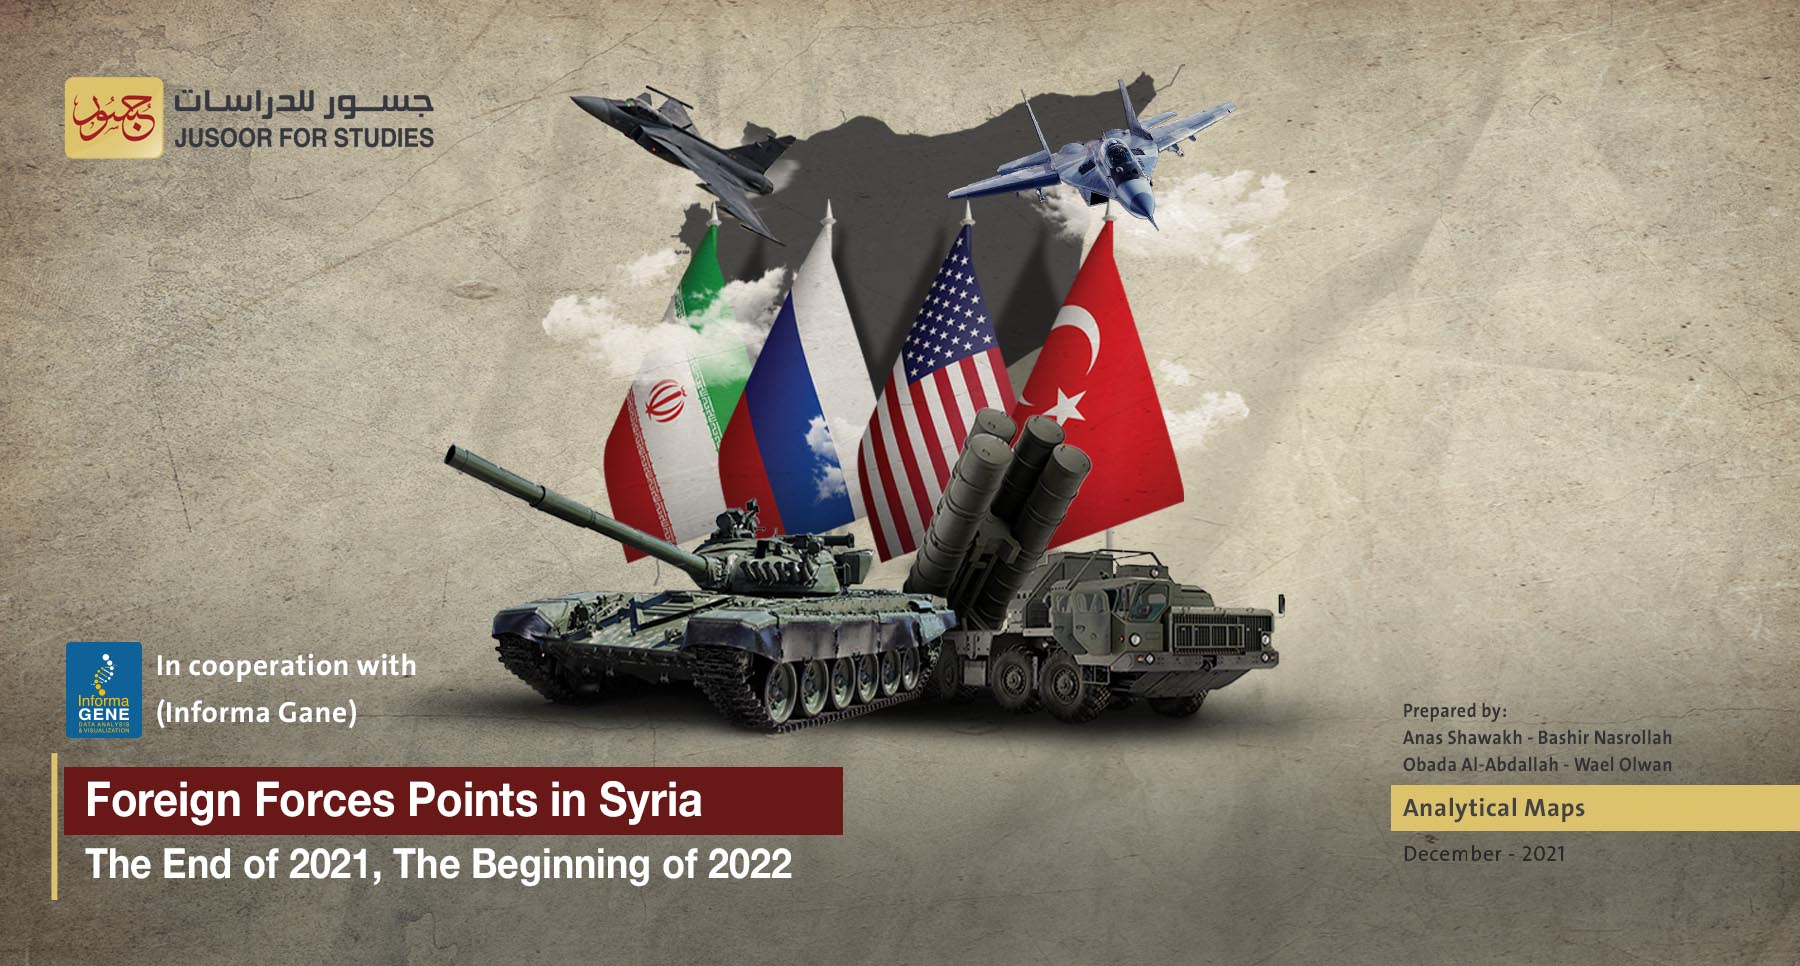 Foreign Forces Points in Syria End of 2021 and Beginning of 2022